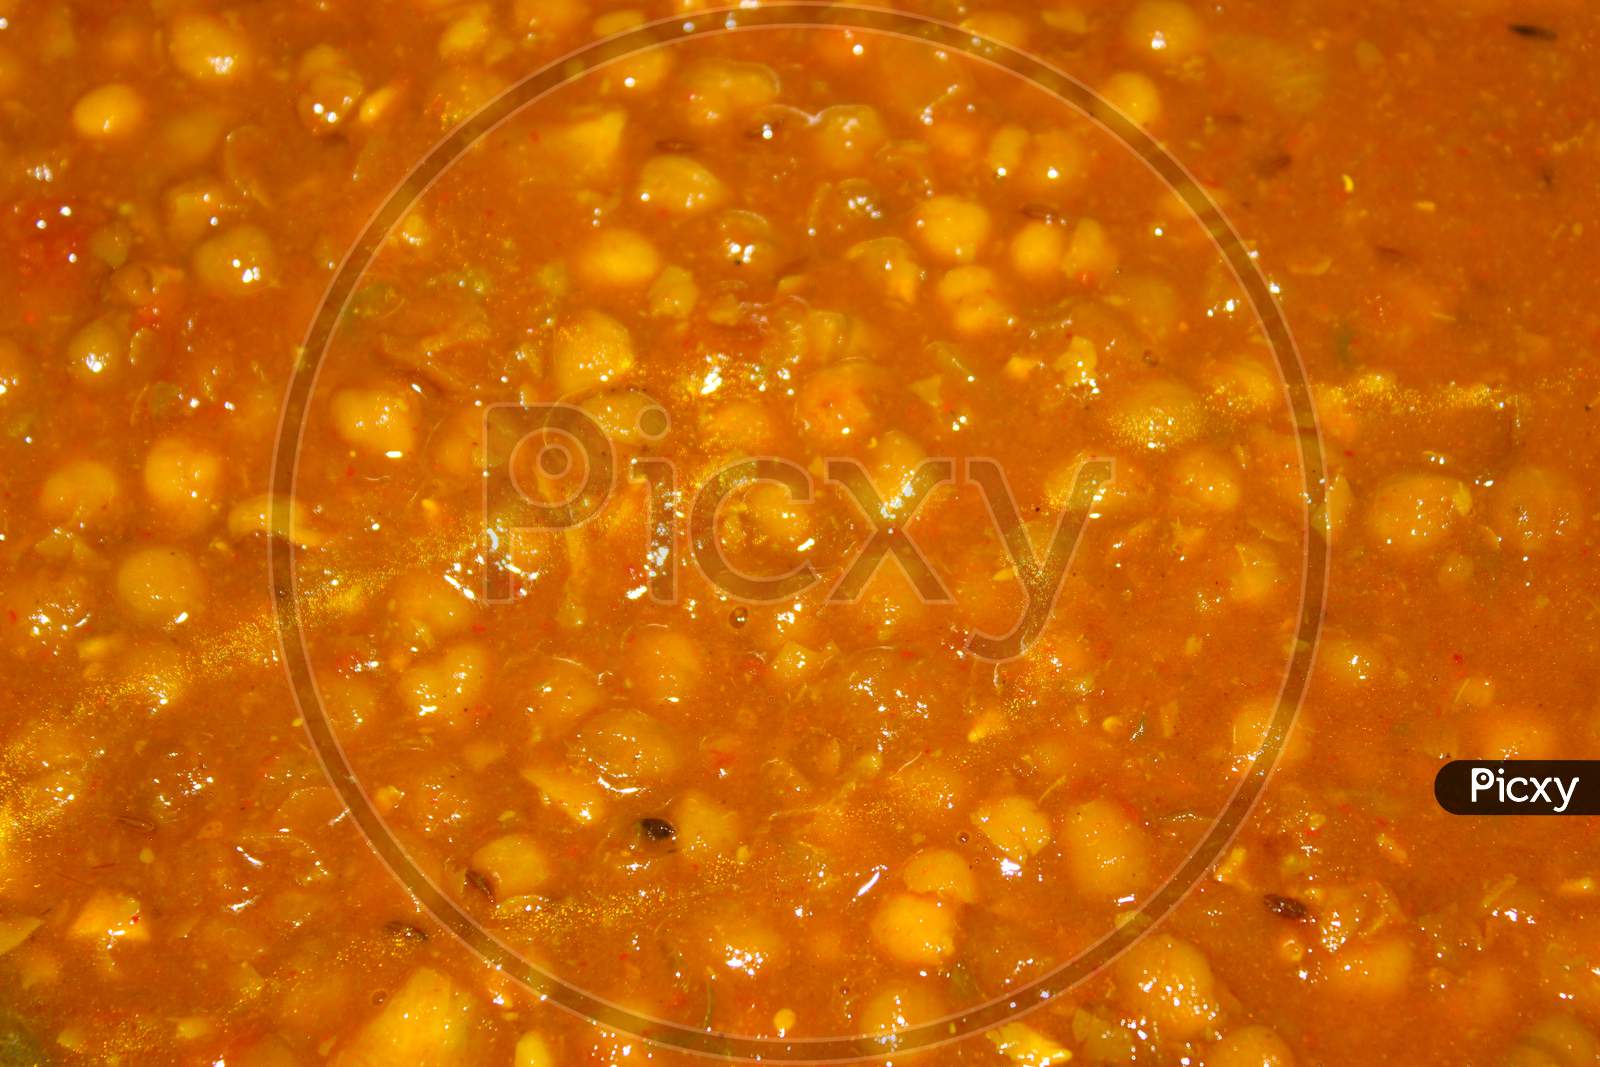 A Picture Of Chole Recipe With Selective Focus